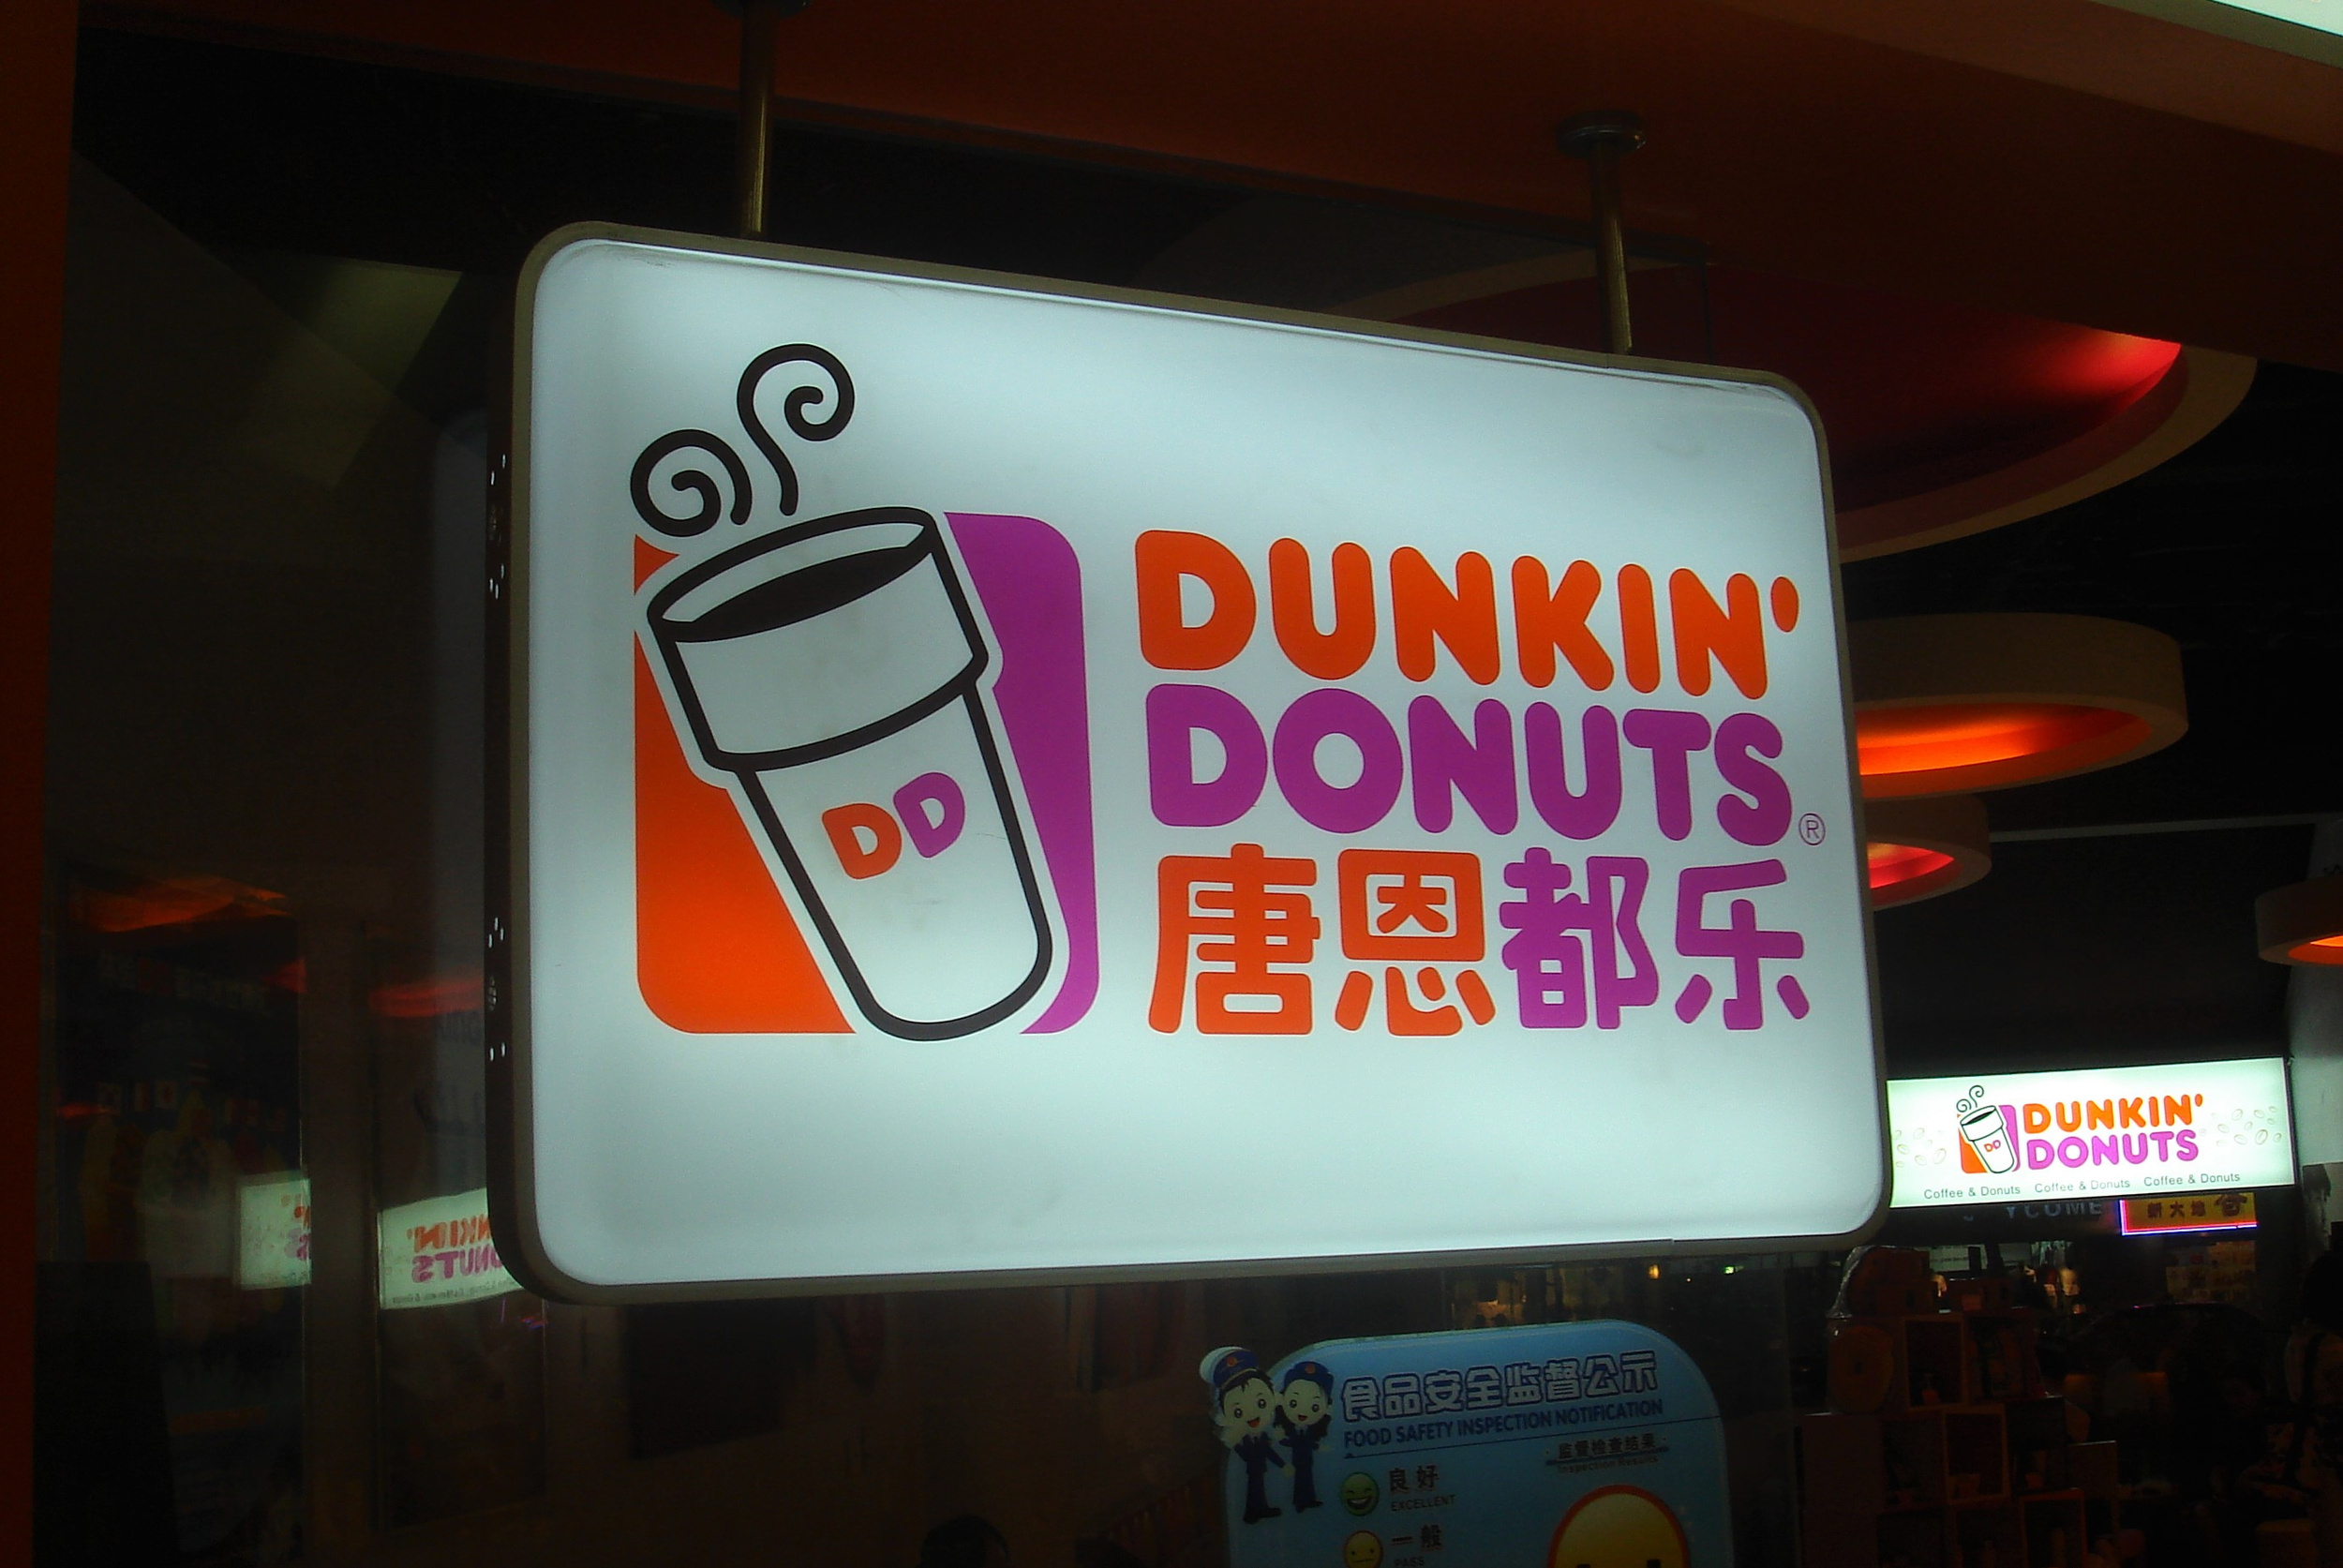 <p>Dunkin’ is an American obsession, but the stores are not limited by U.S. borders. They have 11,300 locations around the world, including 3,200 international storefronts. With the U.S., that covers a total of 37 countries!</p><p>You may also like: <a href='https://www.yardbarker.com/lifestyle/articles/20_of_the_cutest_lake_european_towns/s1__39853602'>20 of the cutest lake European towns</a></p>